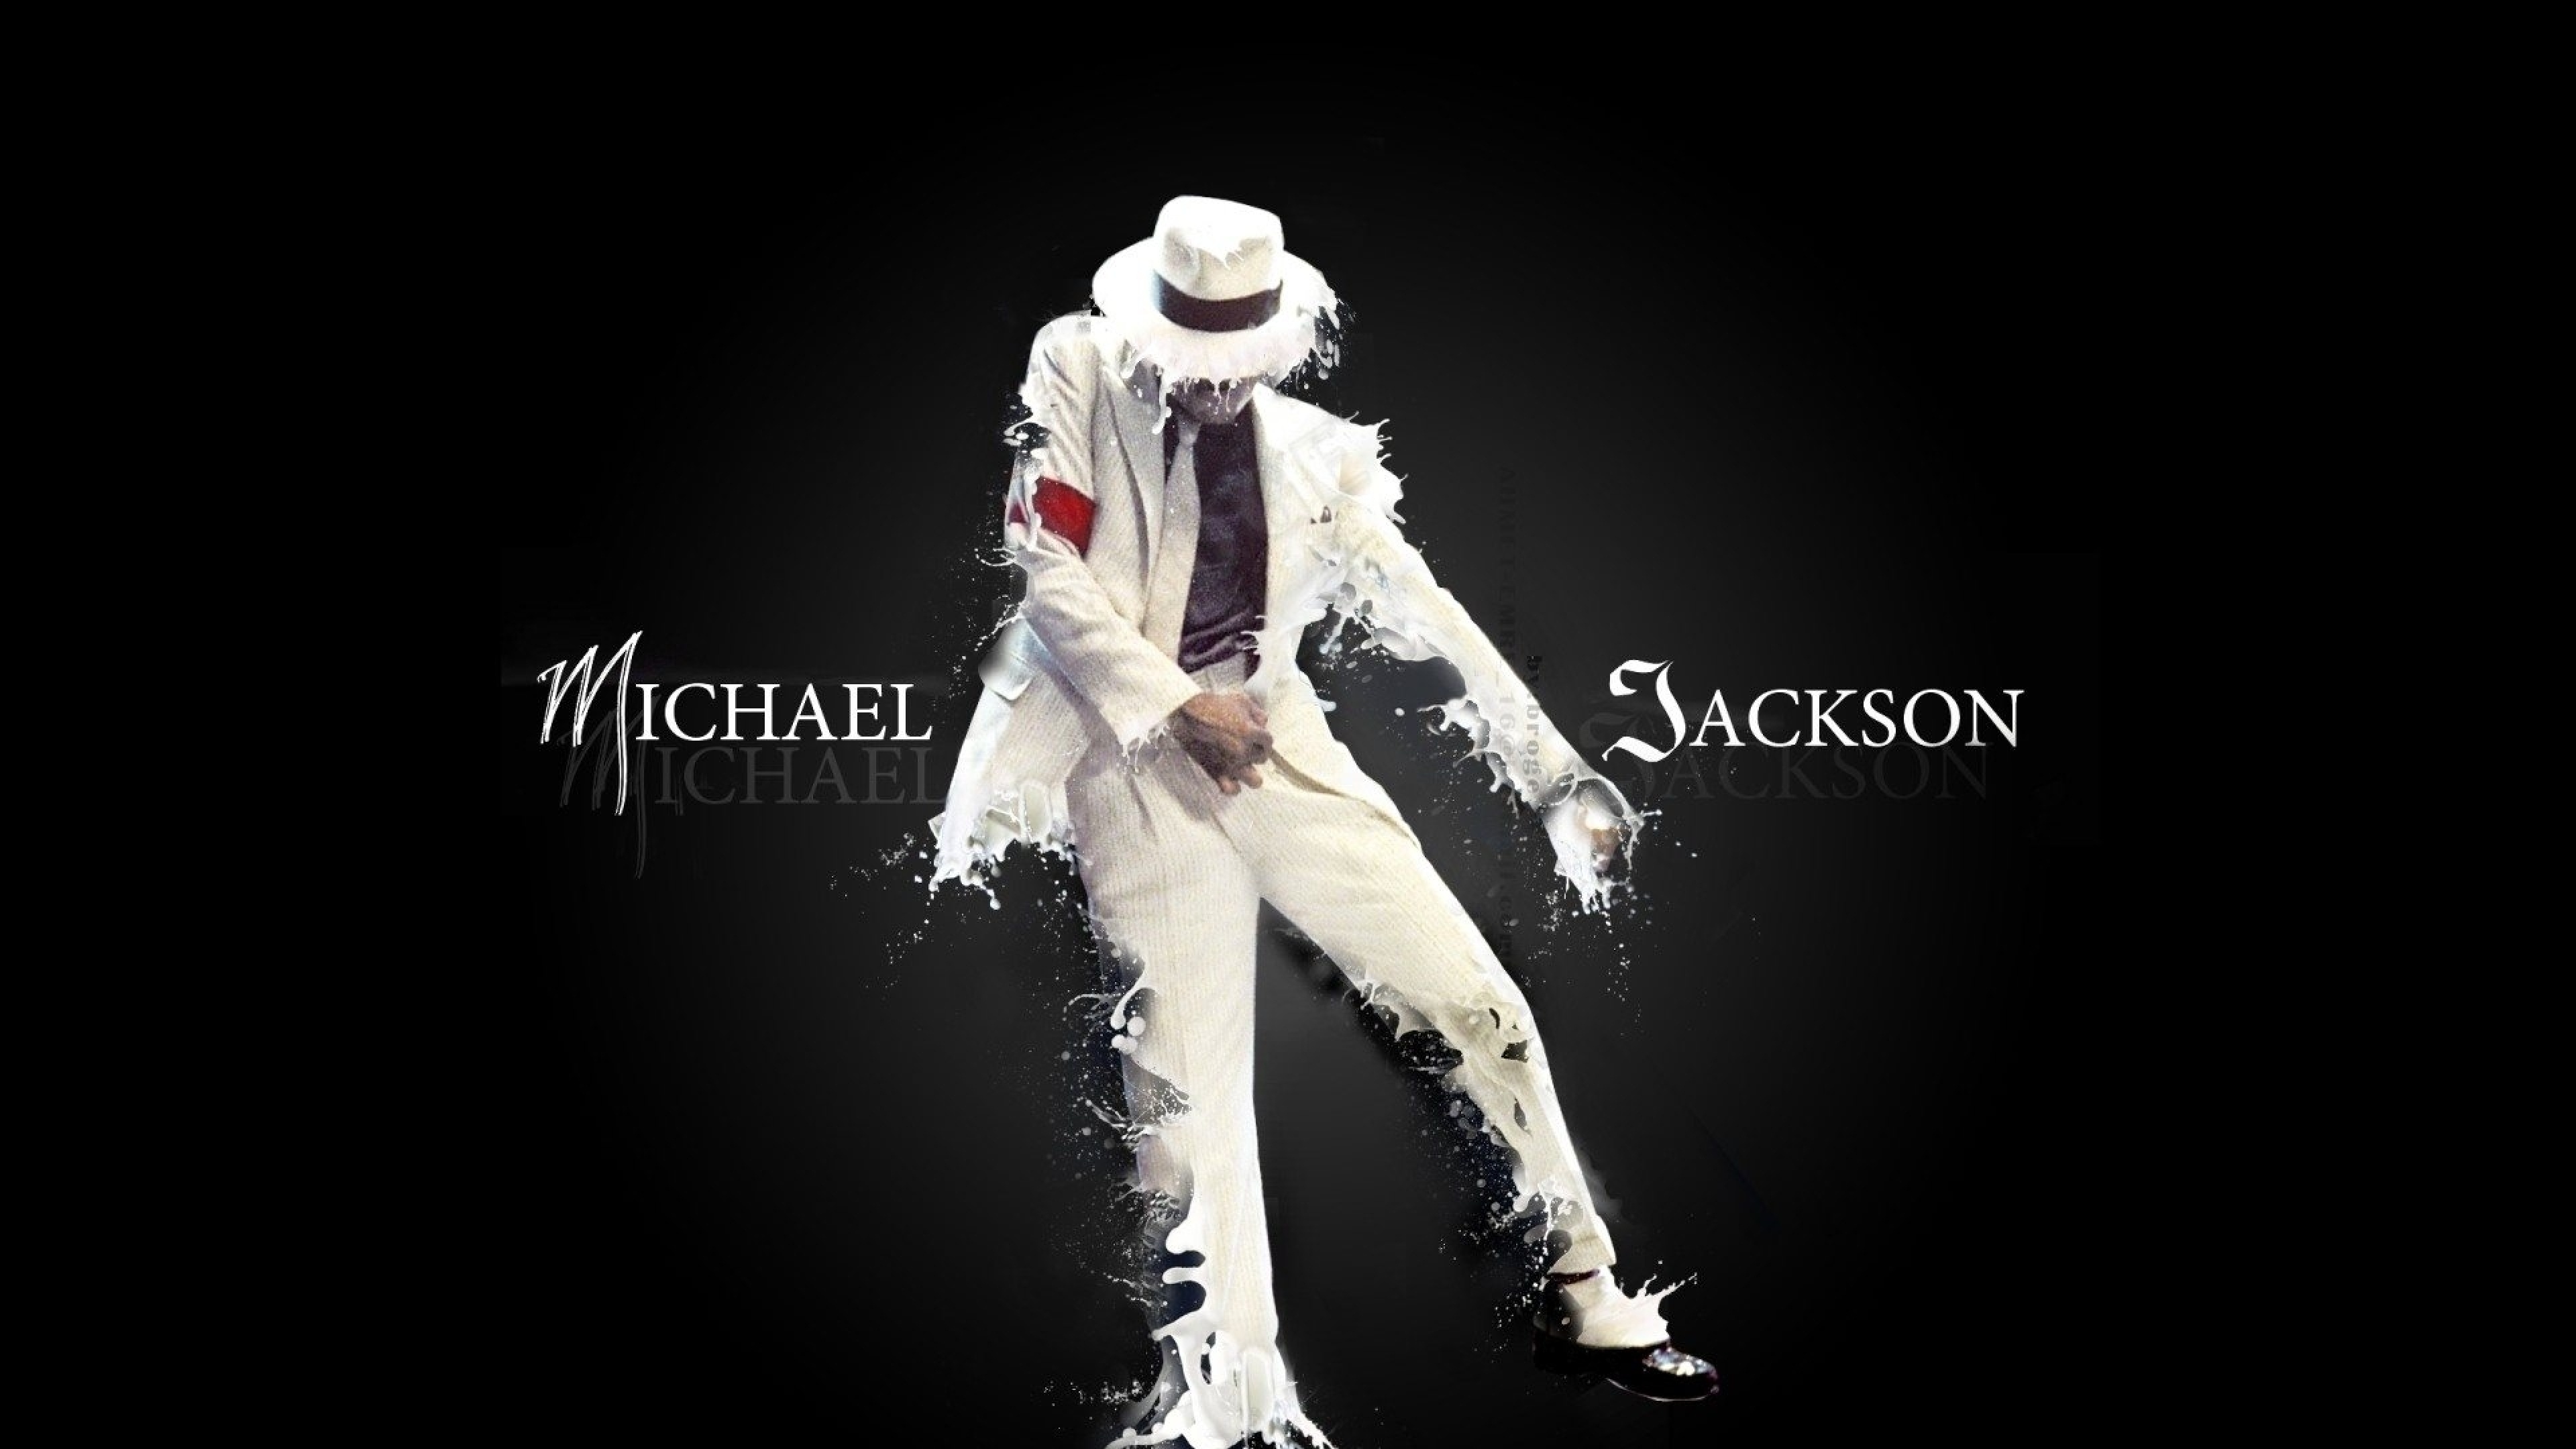 michael jackson images wallpapers #20